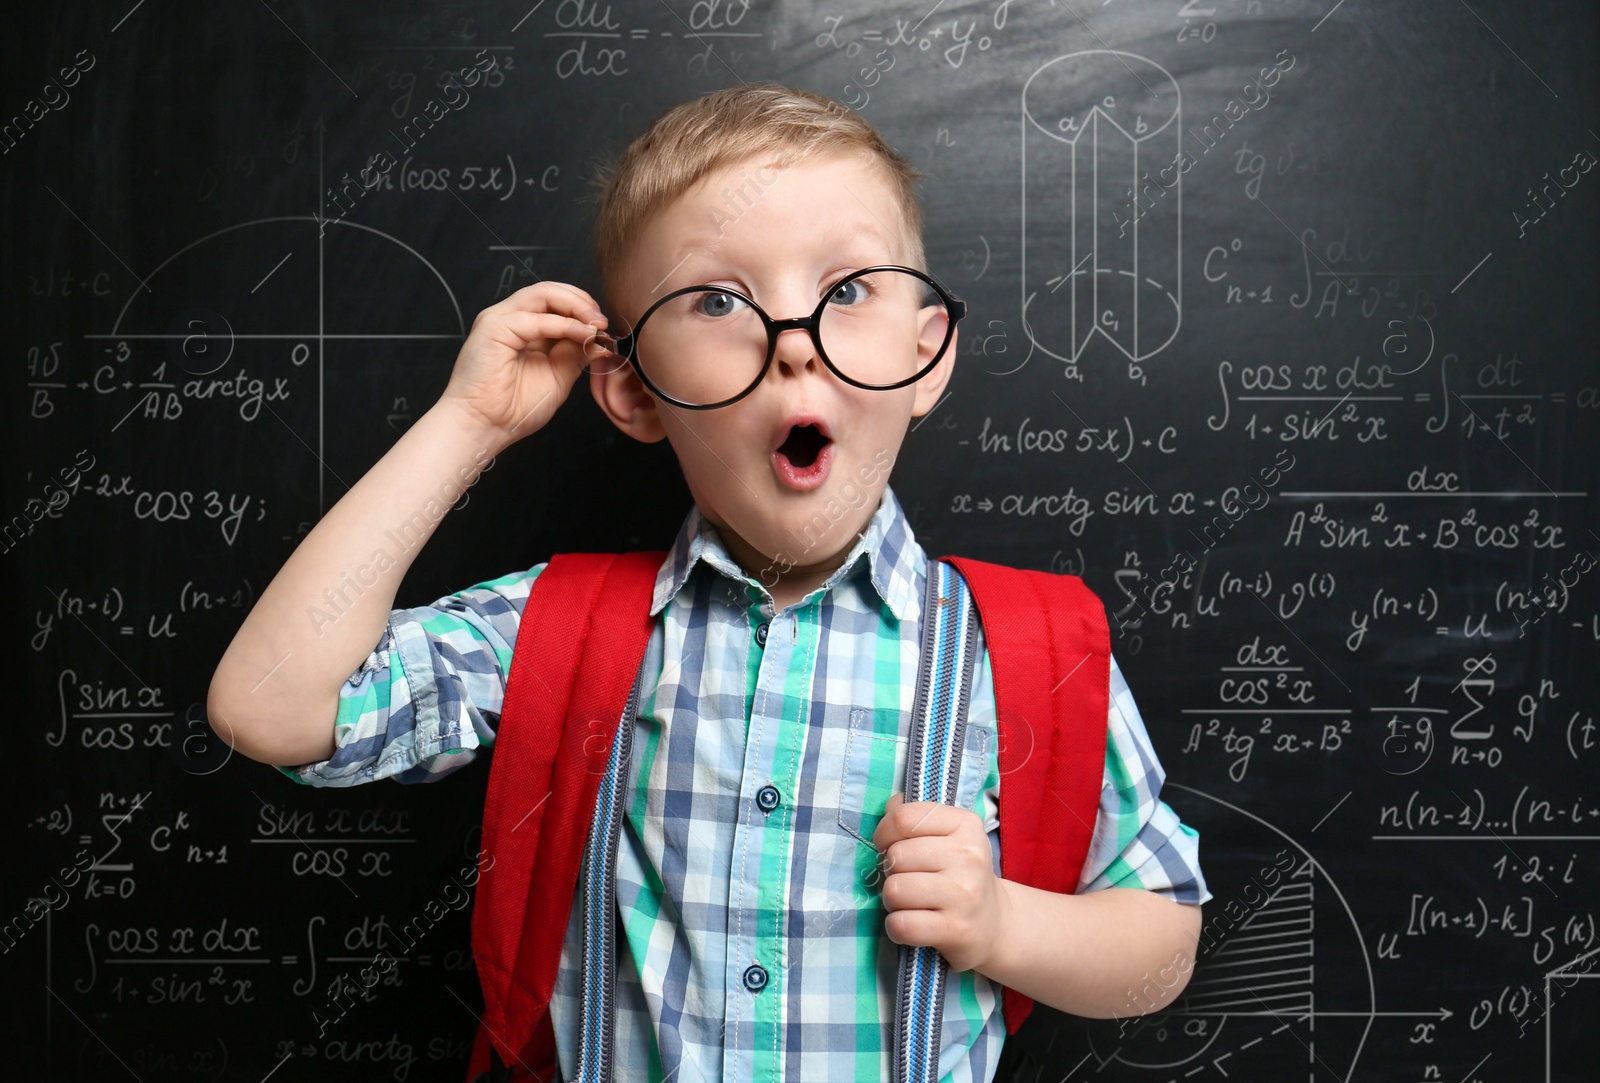 Image of Funny little child wearing glasses near chalkboard with different formulas